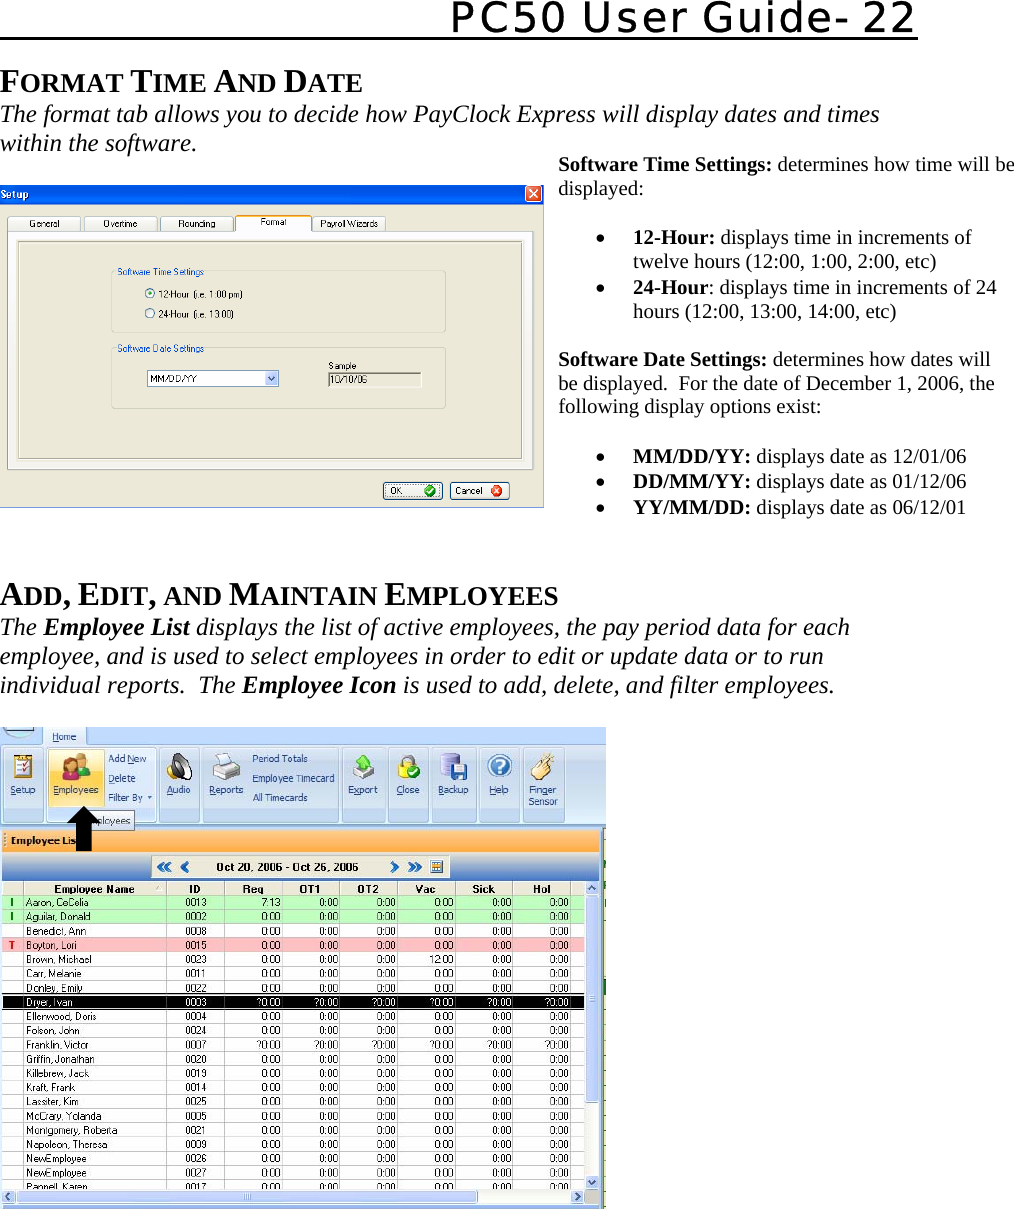   PC50 User Guide- 22   FORMAT TIME AND DATE  The format tab allows you to decide how PayClock Express will display dates and times within the software.       ADD, EDIT, AND MAINTAIN EMPLOYEES The Employee List displays the list of active employees, the pay period data for each employee, and is used to select employees in order to edit or update data or to run individual reports.  The Employee Icon is used to add, delete, and filter employees.          Software Time Settings: determines how time will be displayed:  • 12-Hour: displays time in increments of twelve hours (12:00, 1:00, 2:00, etc) • 24-Hour: displays time in increments of 24 hours (12:00, 13:00, 14:00, etc)  Software Date Settings: determines how dates will be displayed.  For the date of December 1, 2006, the following display options exist:  • MM/DD/YY: displays date as 12/01/06 • DD/MM/YY: displays date as 01/12/06 • YY/MM/DD: displays date as 06/12/01  